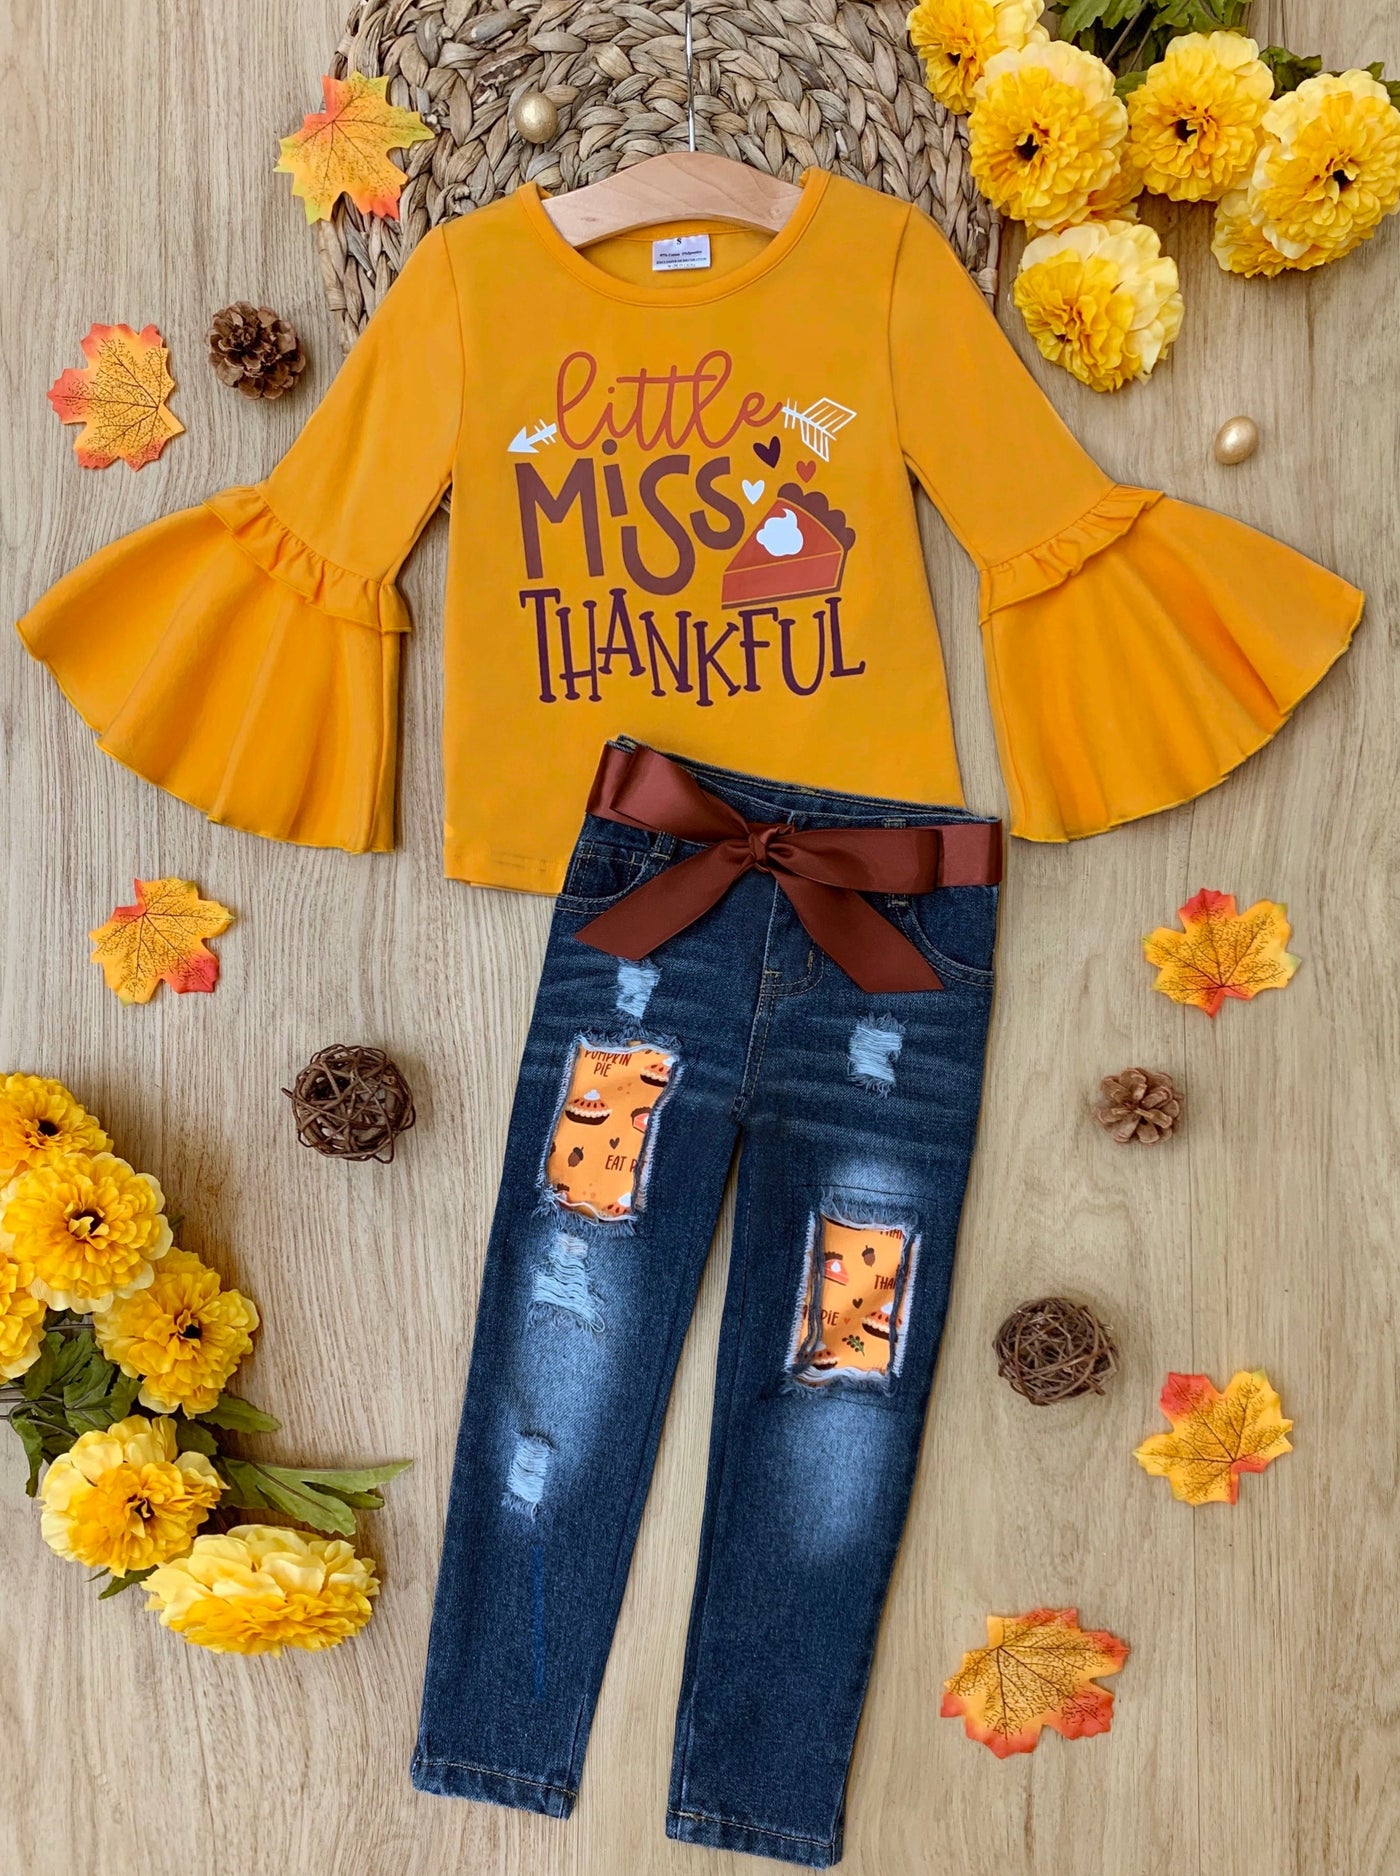 Thanksgiving Outfits | Thankful Flair Sleeve Top & Patched Jeans Set